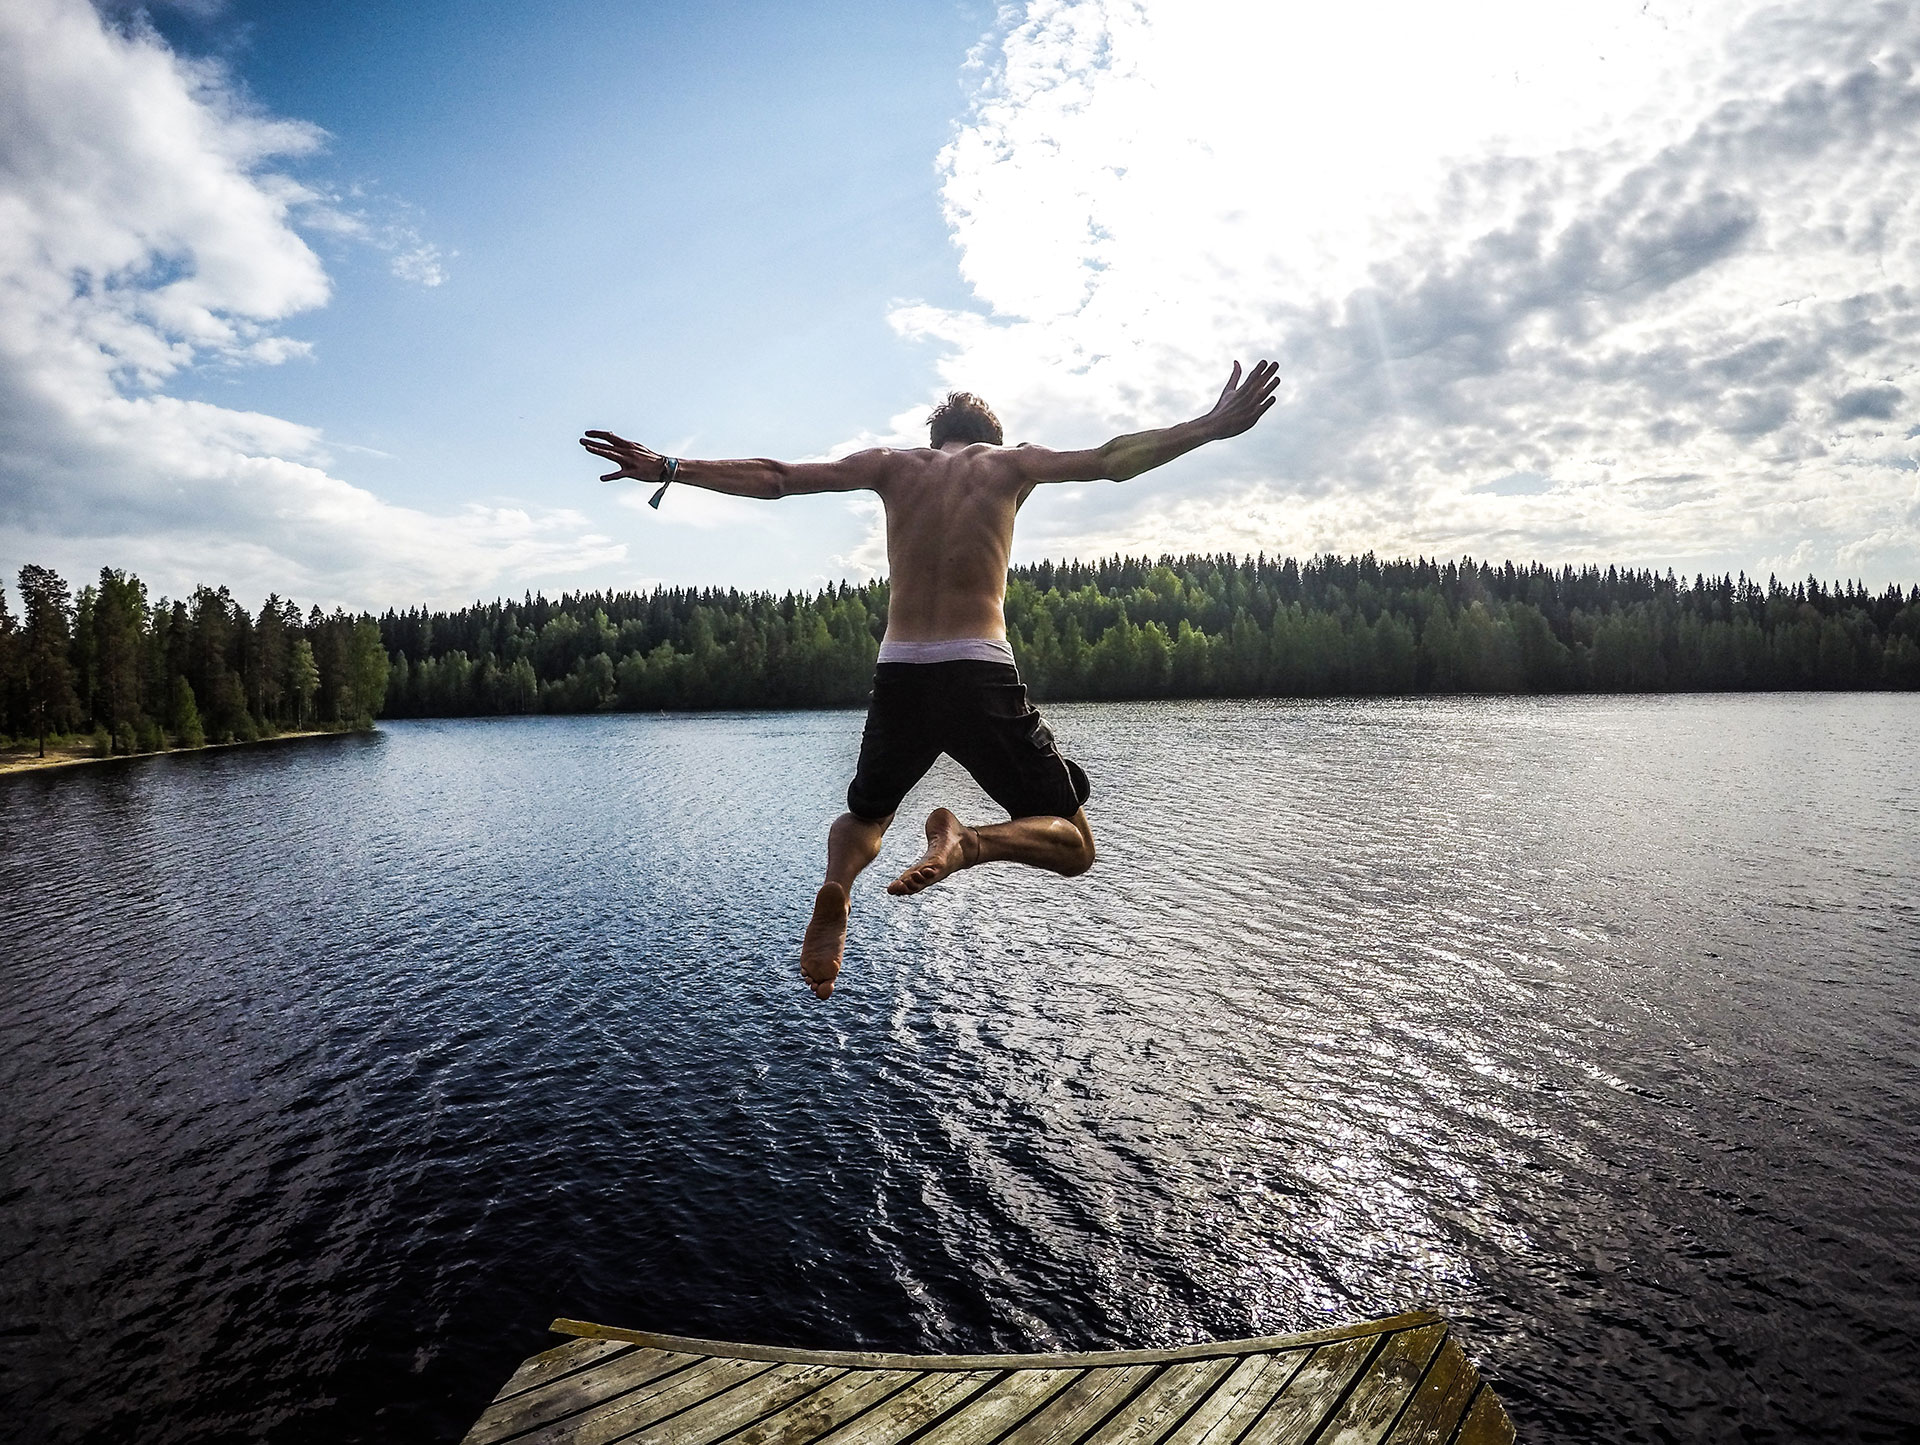 man leaping, soaring like a bird into water